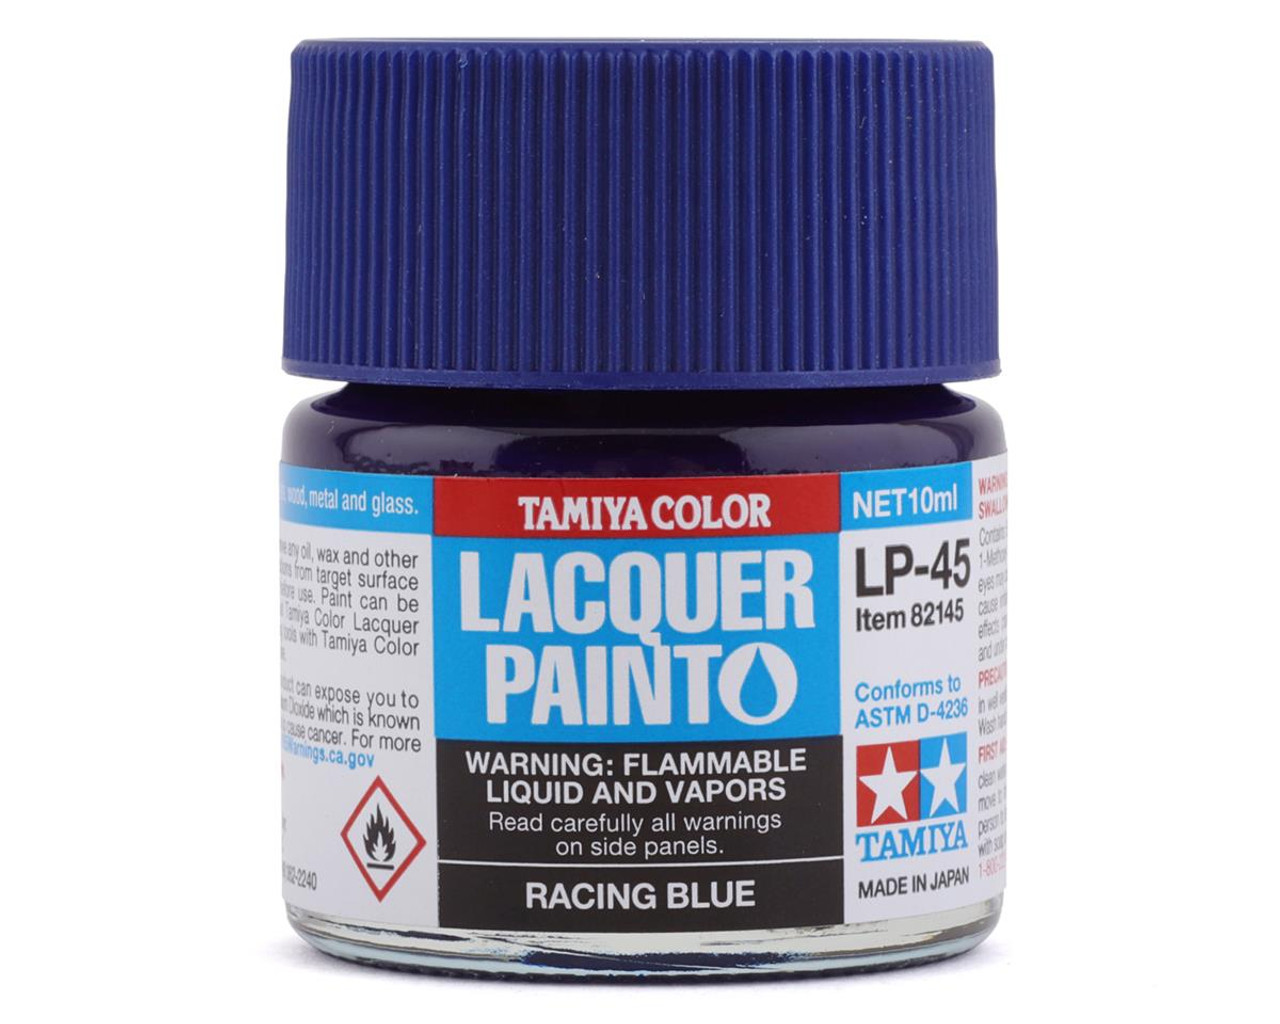 Tamiya 82145 Lacquer Paint LP-45 Racing Blue 10ml Bottle